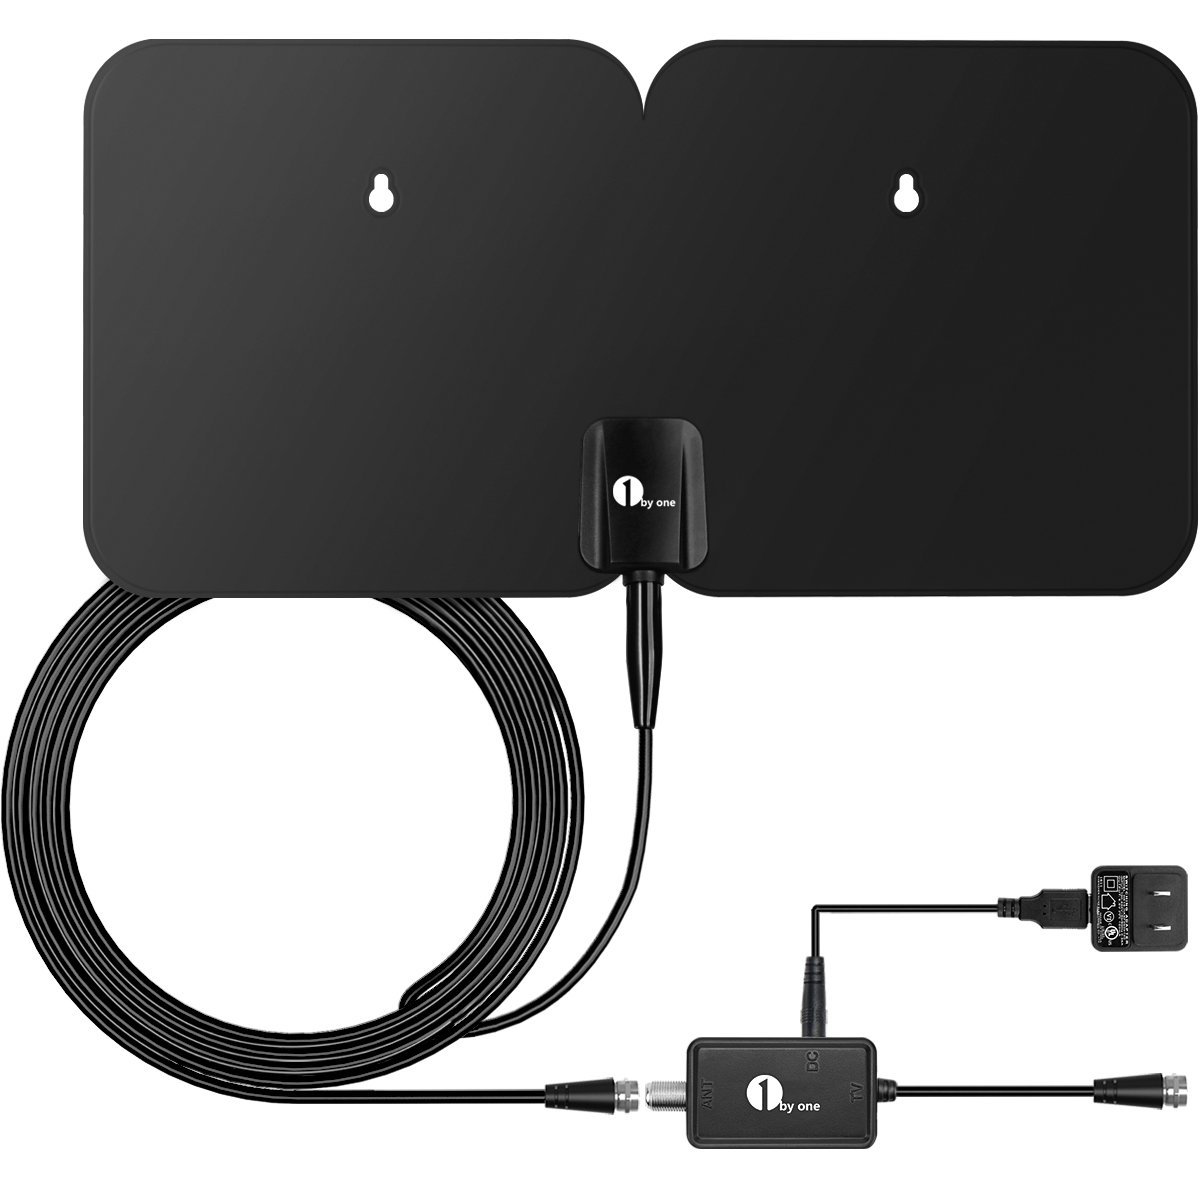 Book Cover 1byone 4K Double Panel HDTV Antenna, 1byone Indoor/Outdoor Amplified Digital TV Antenna Waterproof Support UHF VHF 4K Ultra HD Freeview Channels with 26ft Coaxial Cable